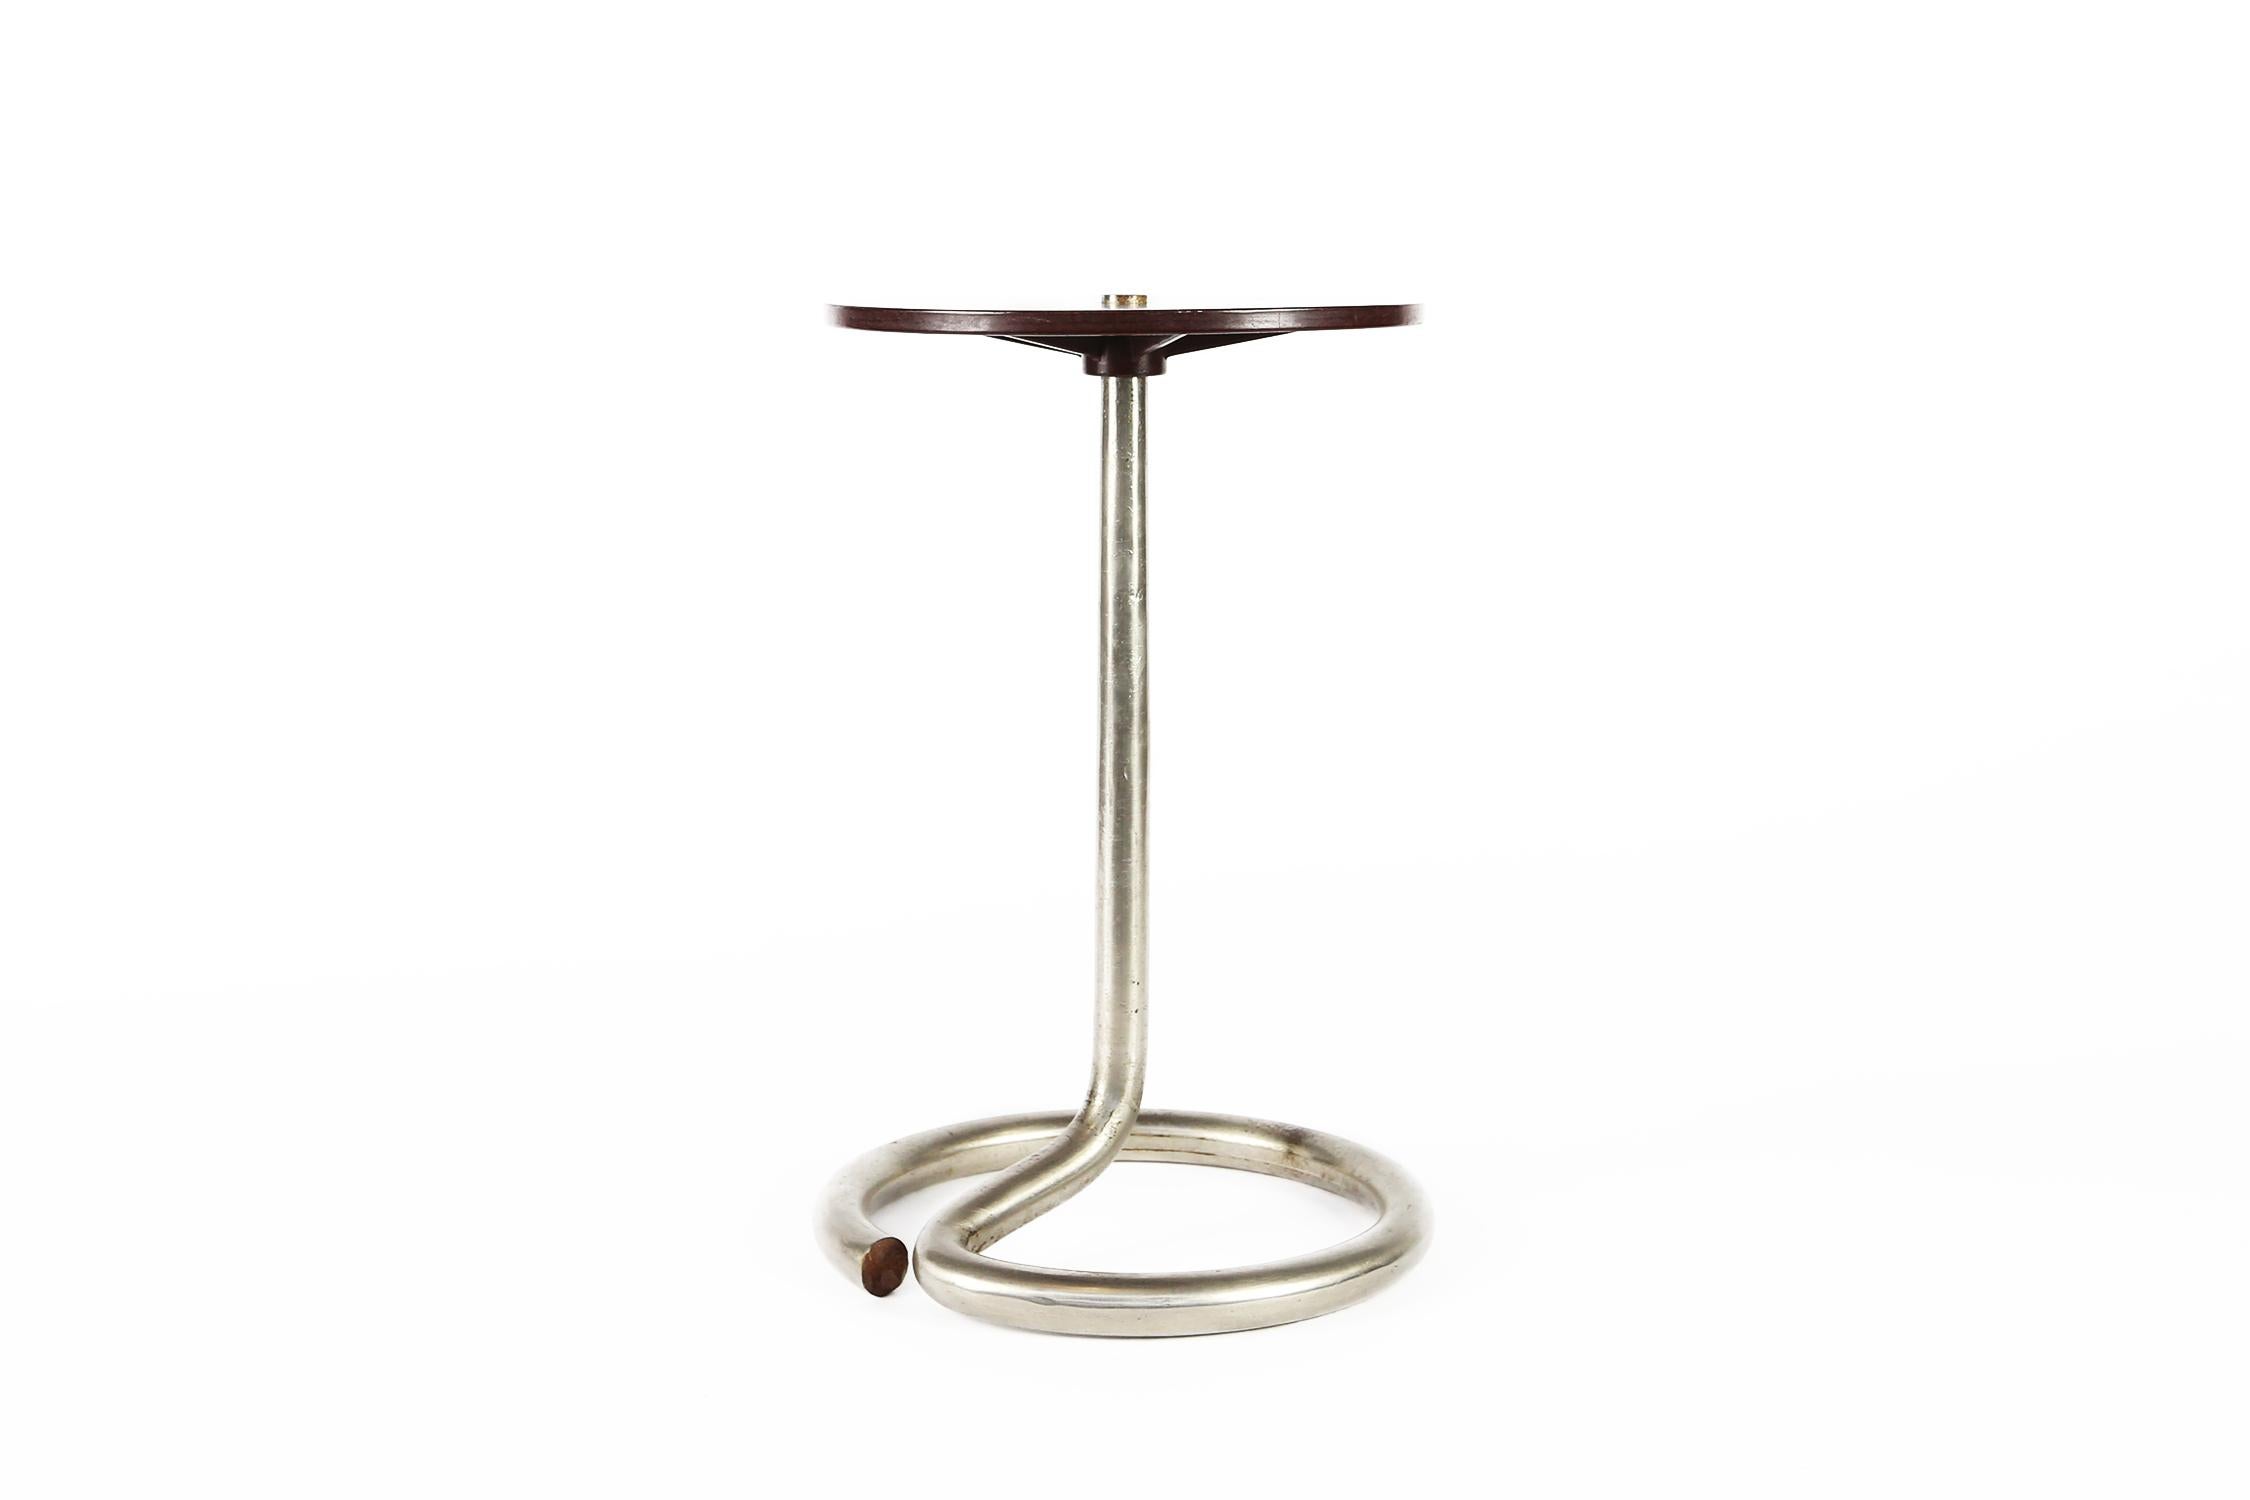 This minimal modernist side table was designed by René Herbst for Stablet in France, circa 1935.
The elegant tubular chromed base holds the black bakelite round top.
Signed under the metal base and the bakelite top.